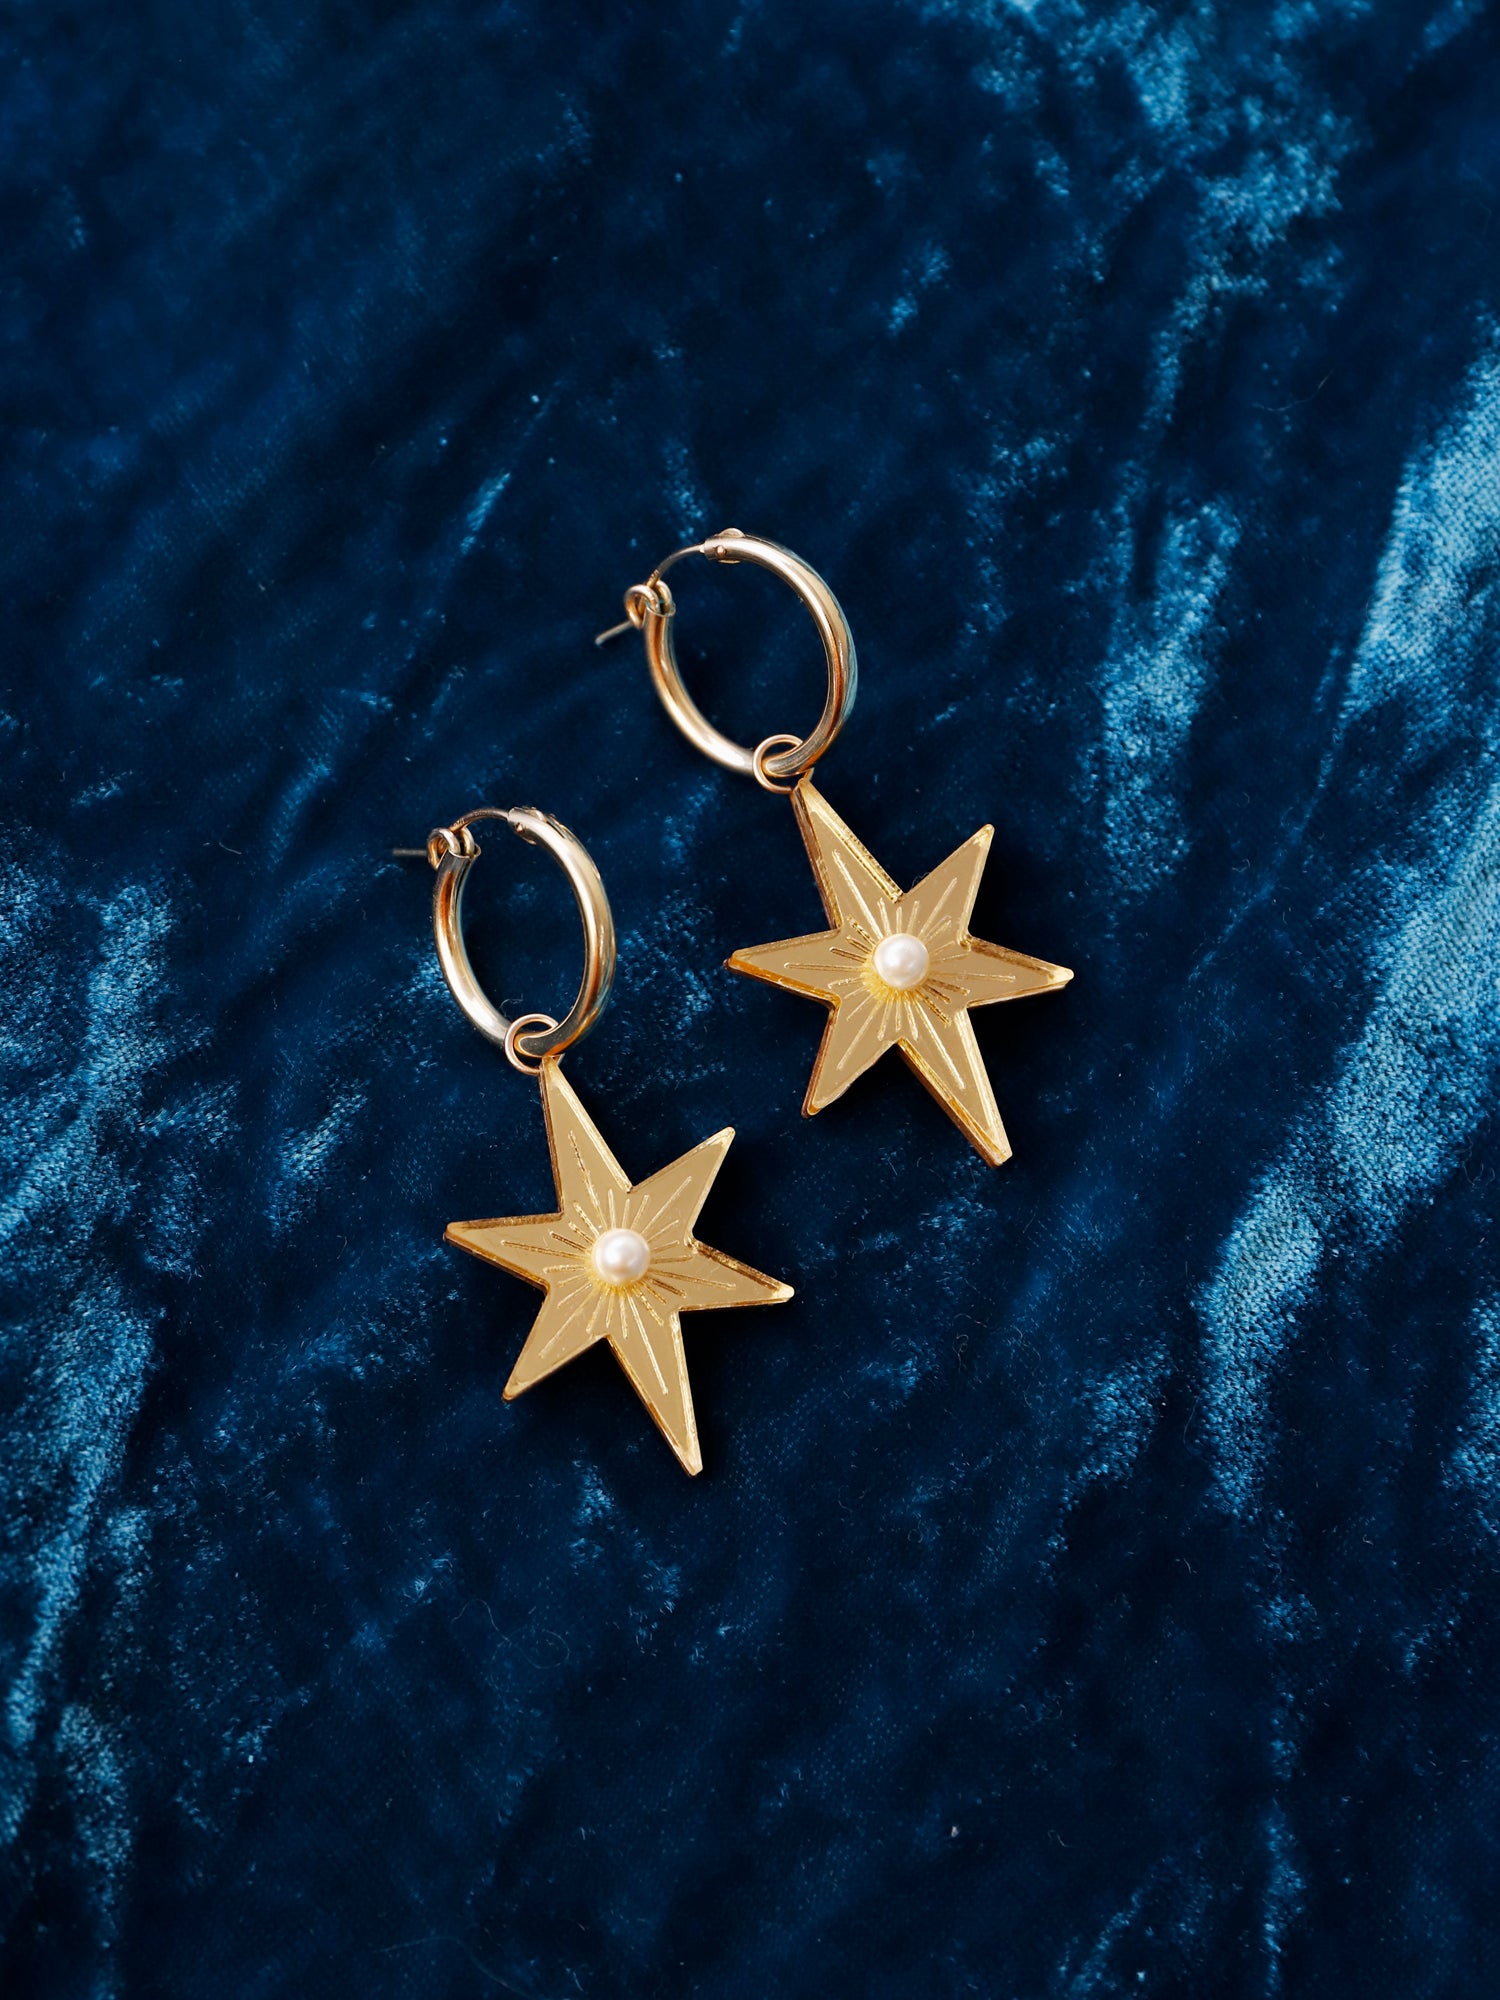 Statement star hoops made with gold mirrored acrylic, embellished with glass pearls and hand inked details. Handmade in London by Wolf & Moon.